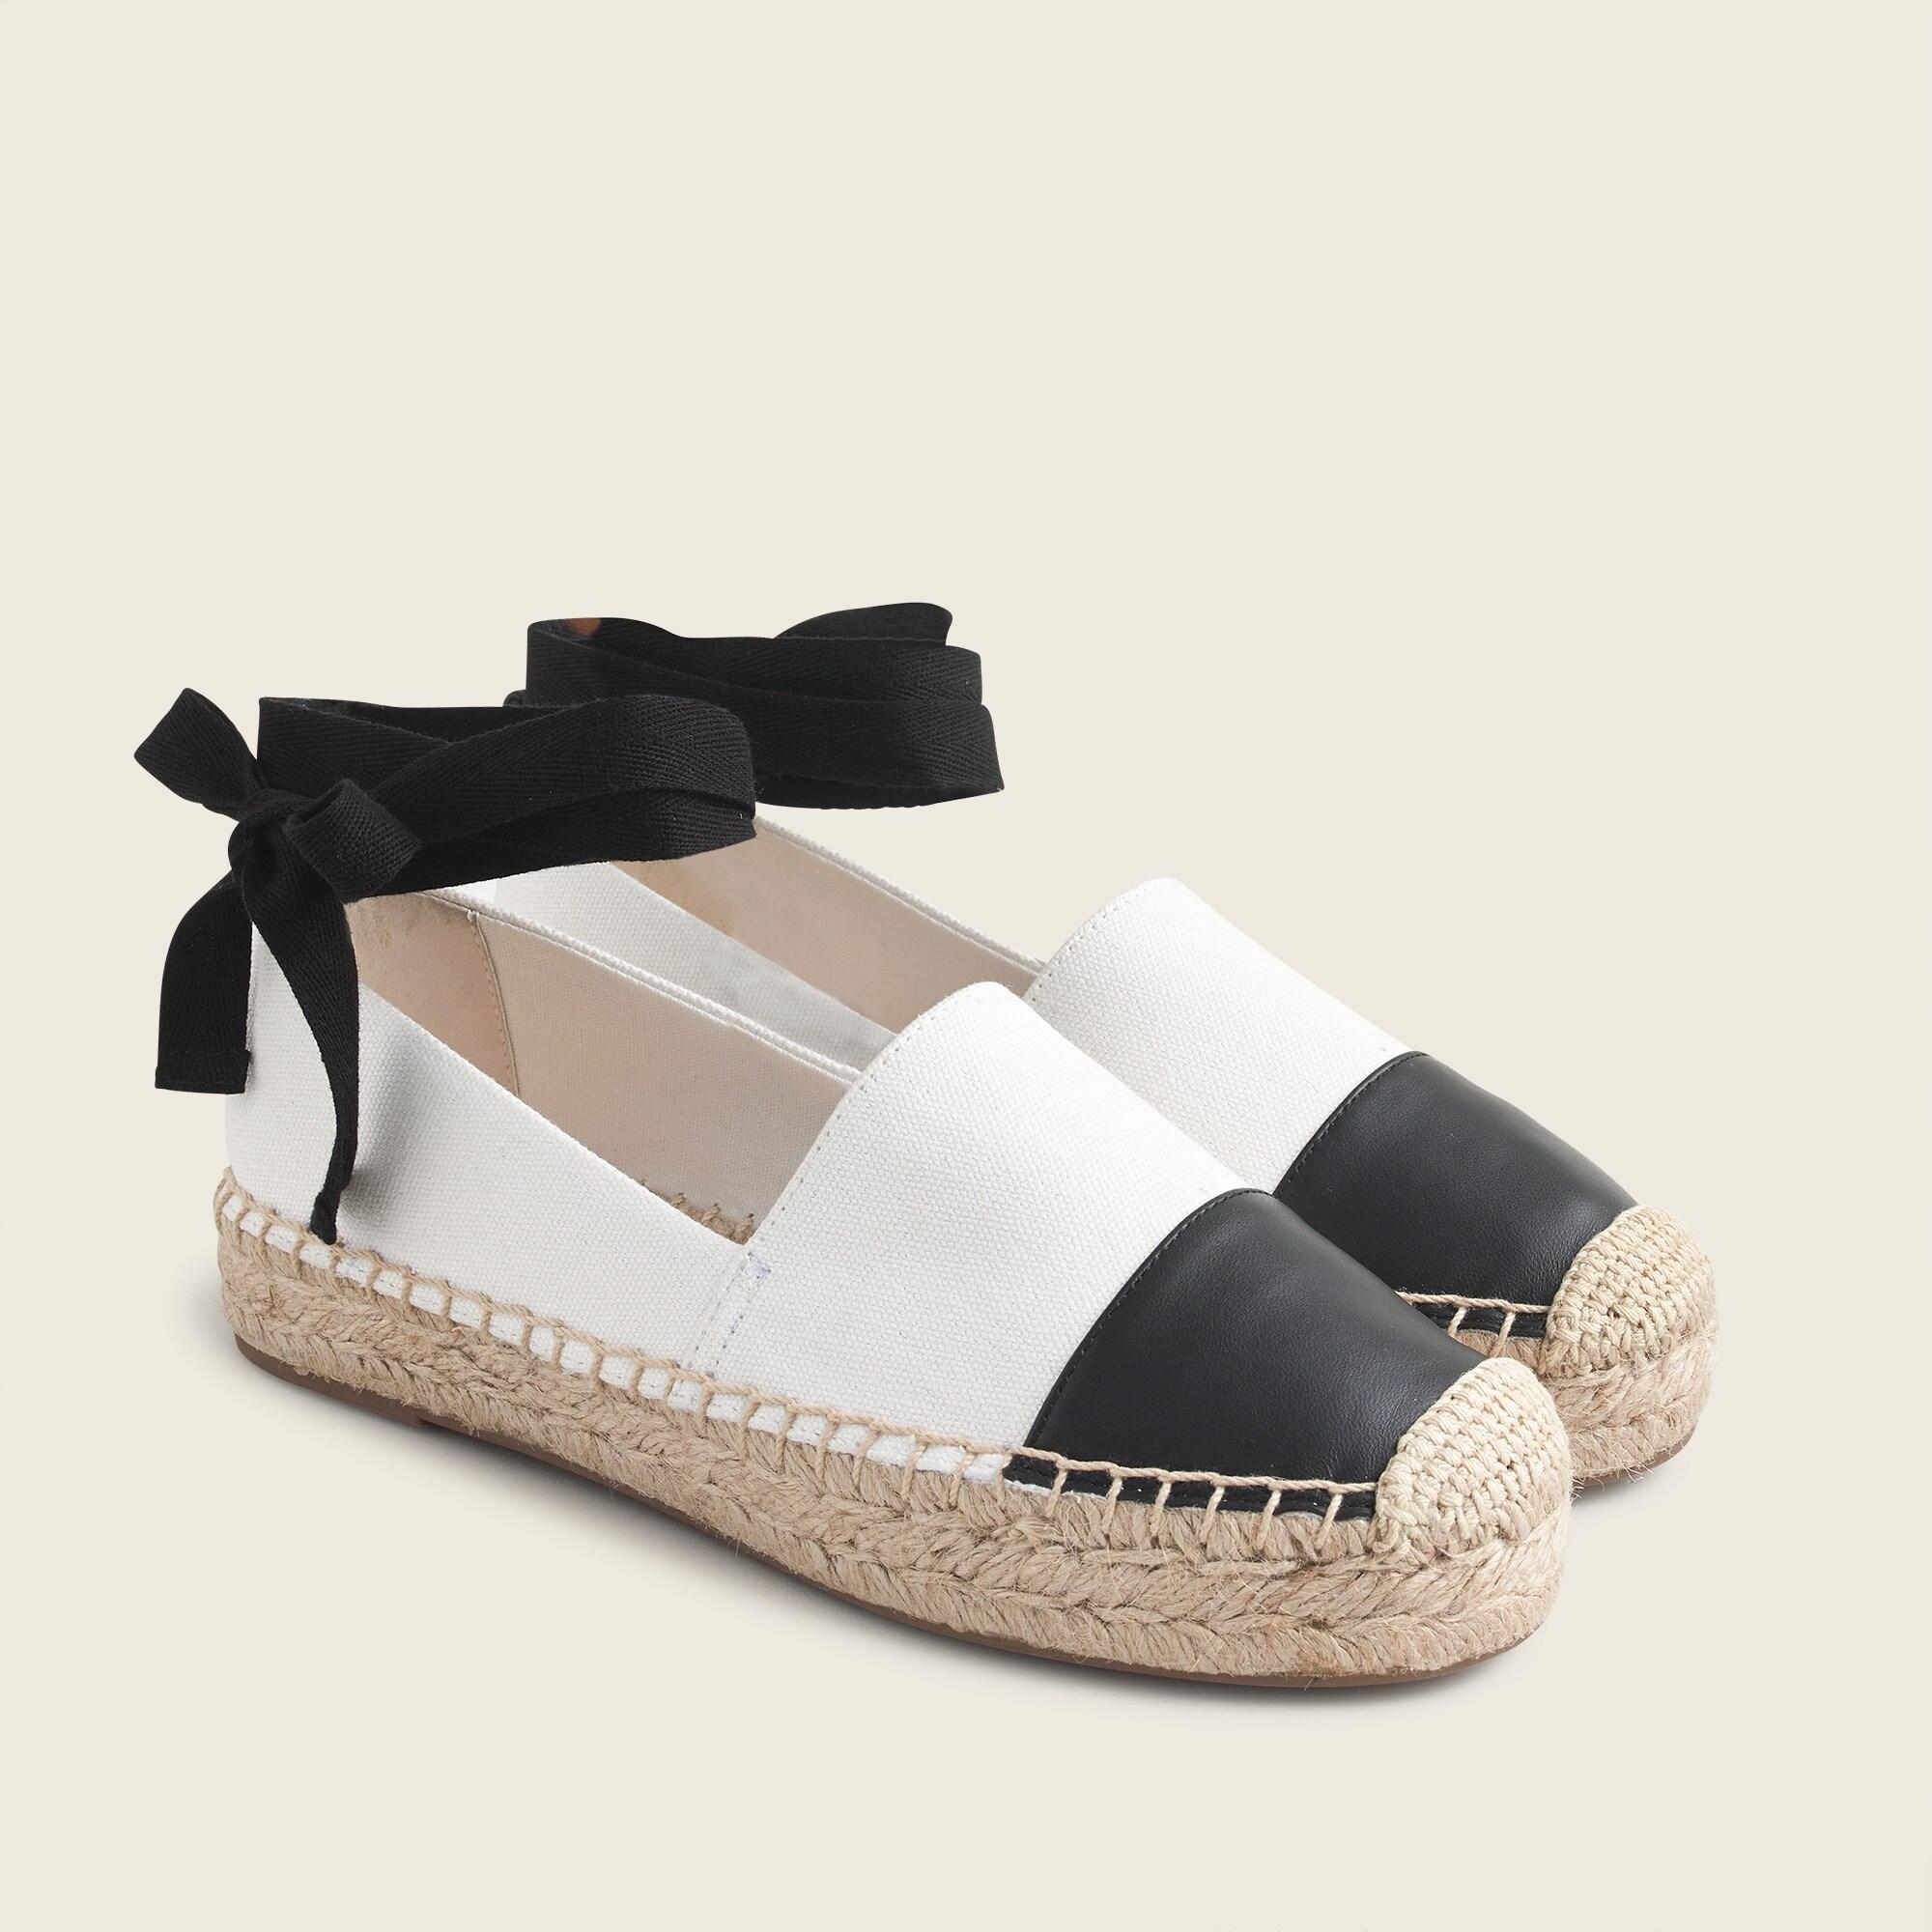 J.Crew Canvas Espadrille Flats With Leather Cap Toe in Ivory 